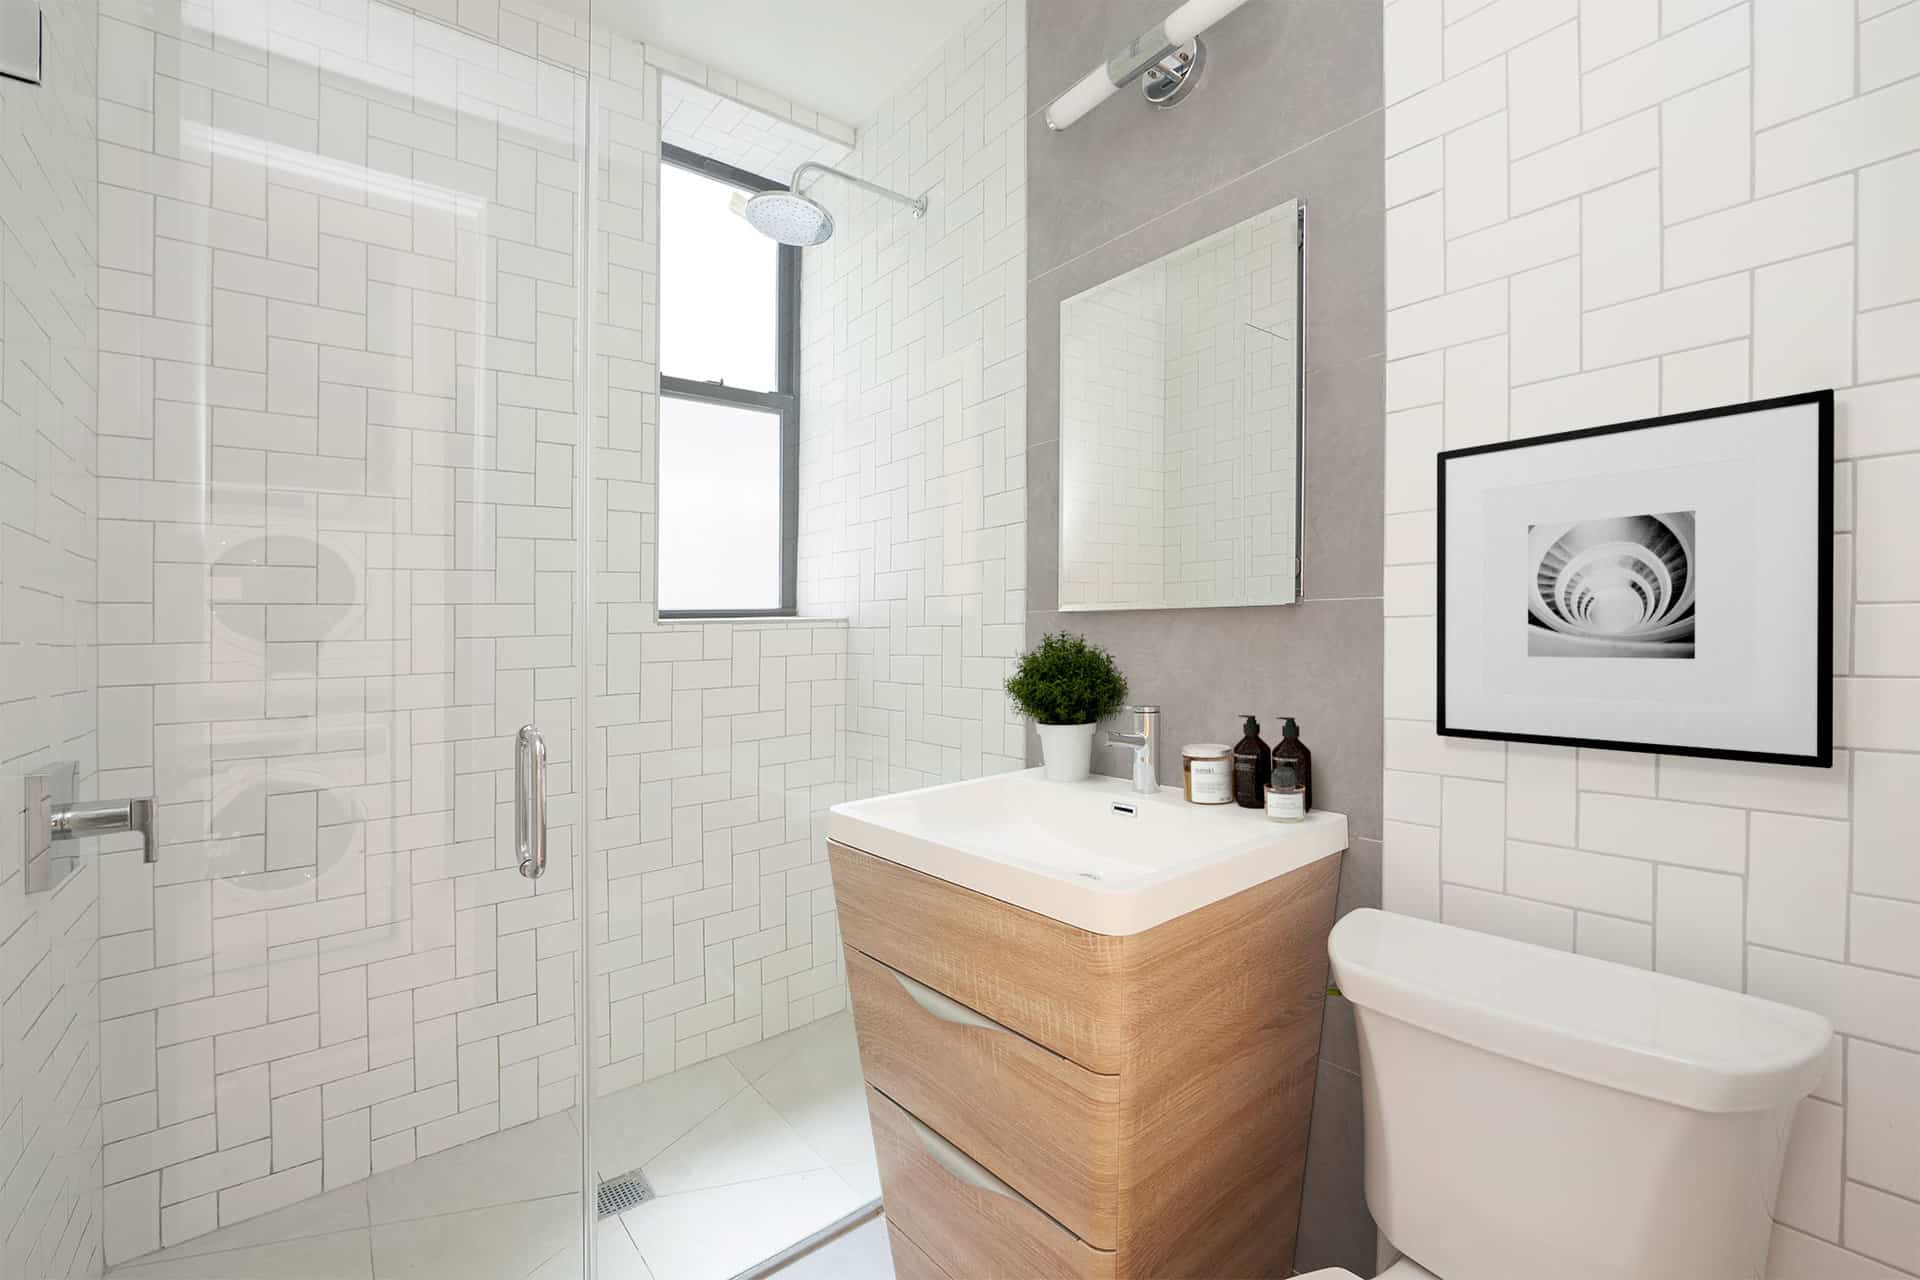 Bathroom at 244 East 7th Street apartments in New York. White tile walls, single vanity with square mirror & walk-in shower.